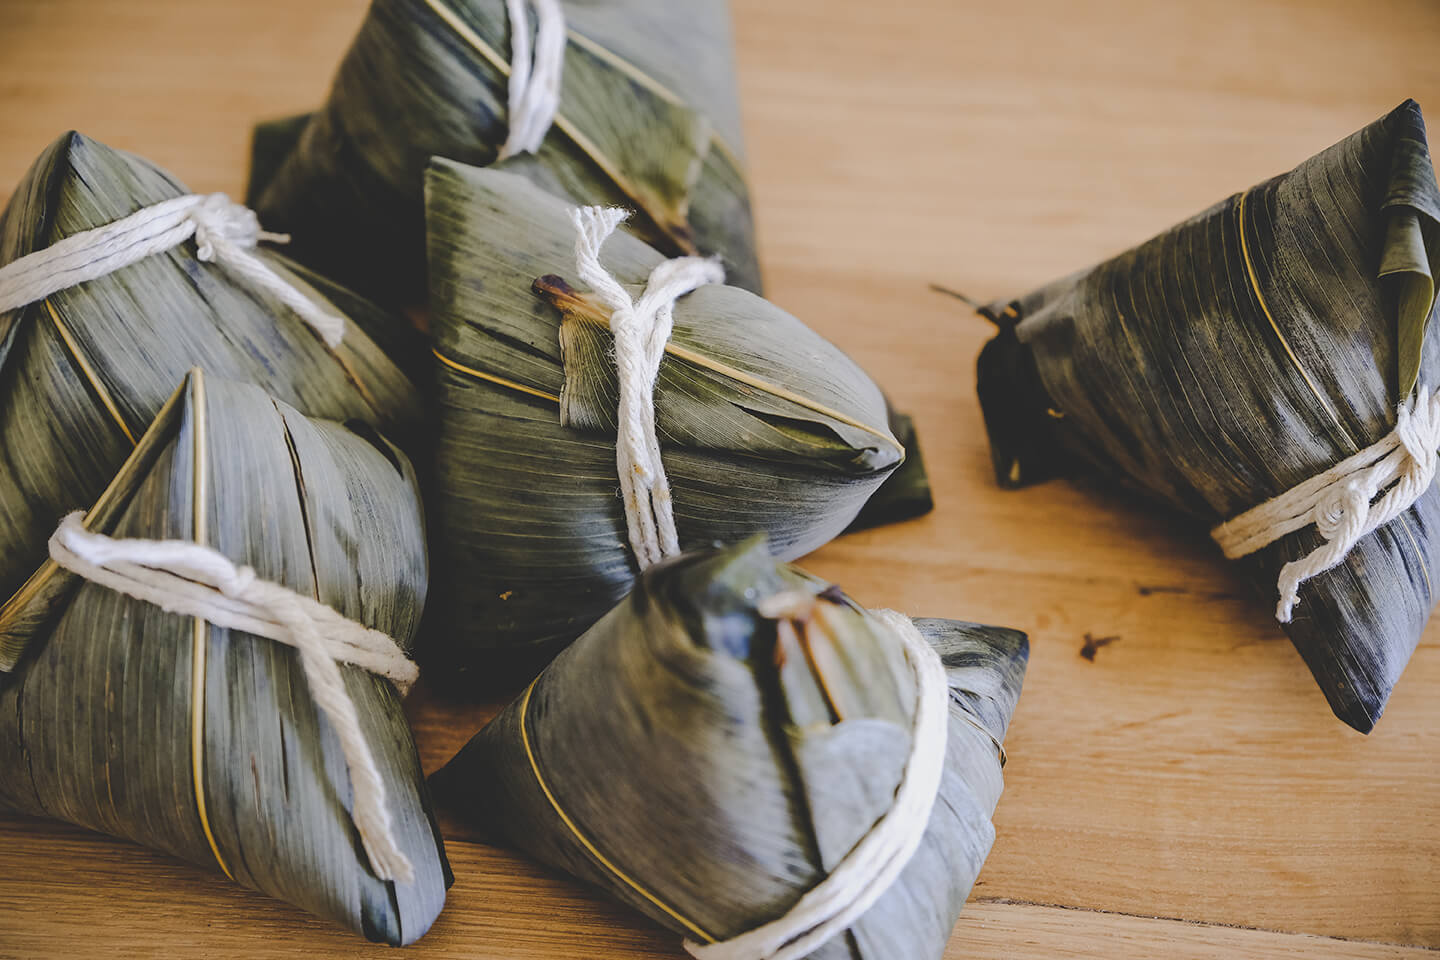 Bundles of food wrapped in bamboo leaves tied shut with twine.